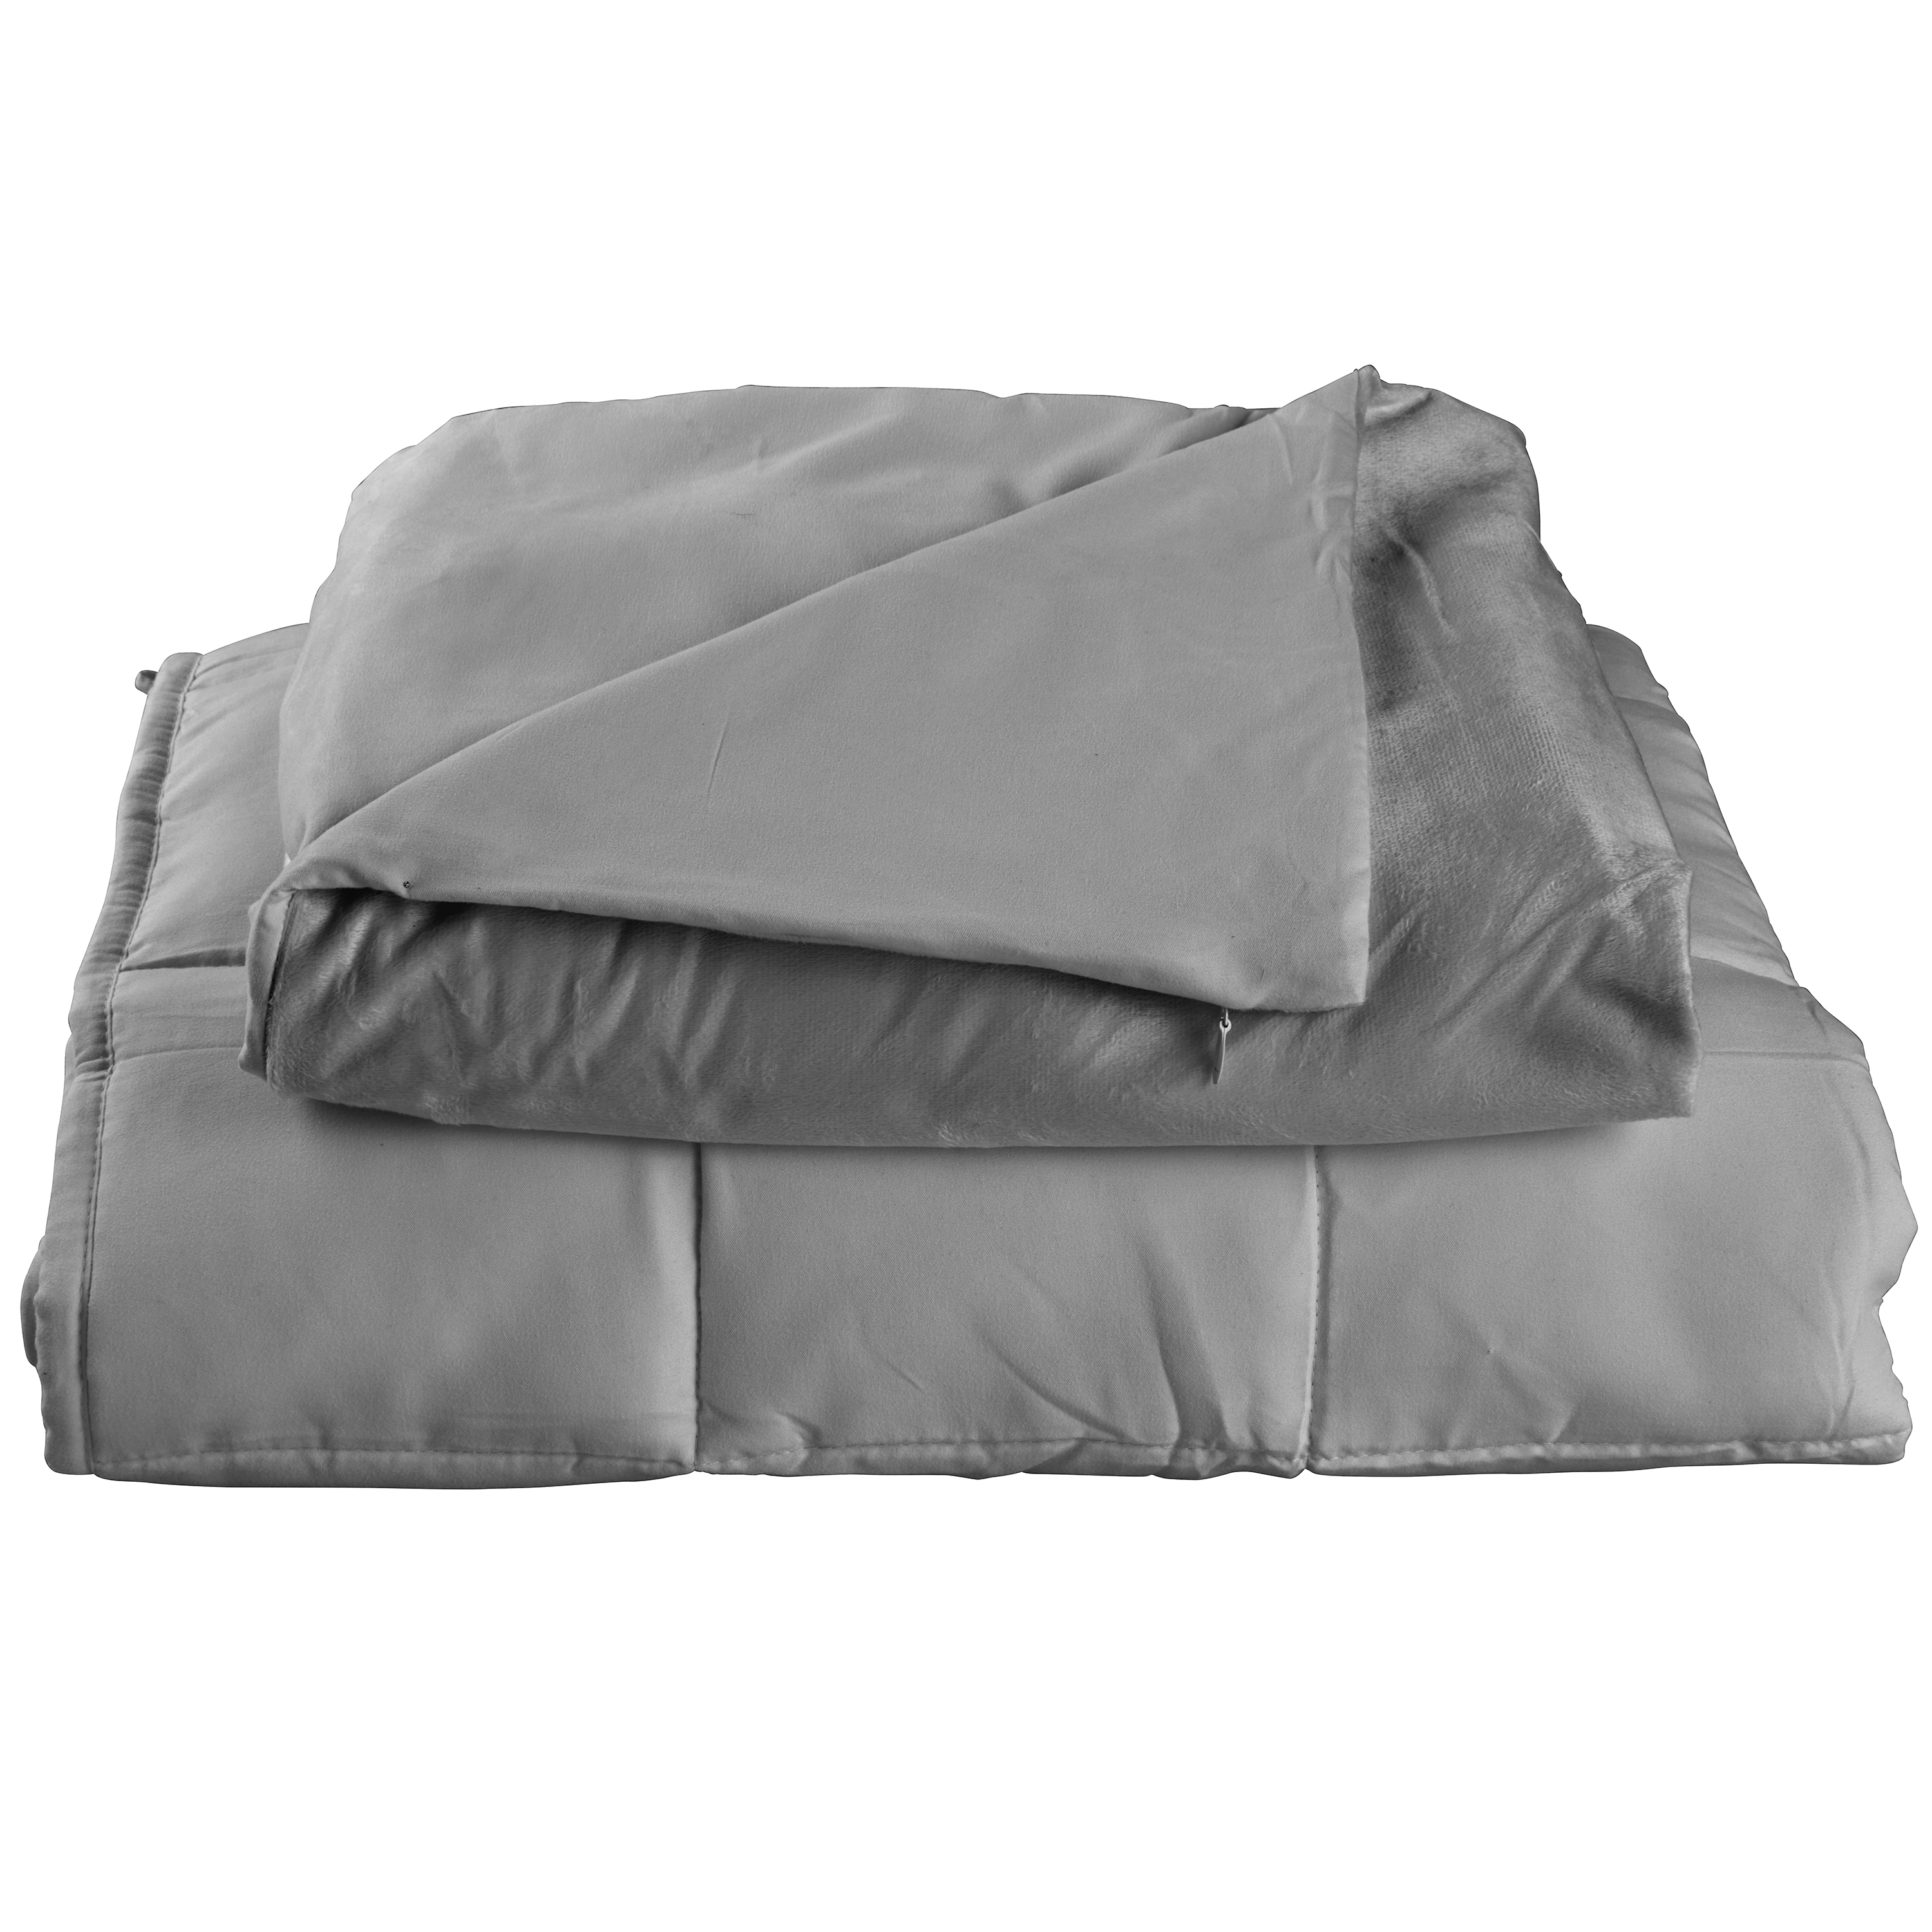 Tranquility Temperature Balancing Weighted Blanket with Washable Cover, 18 lbs - image 8 of 10